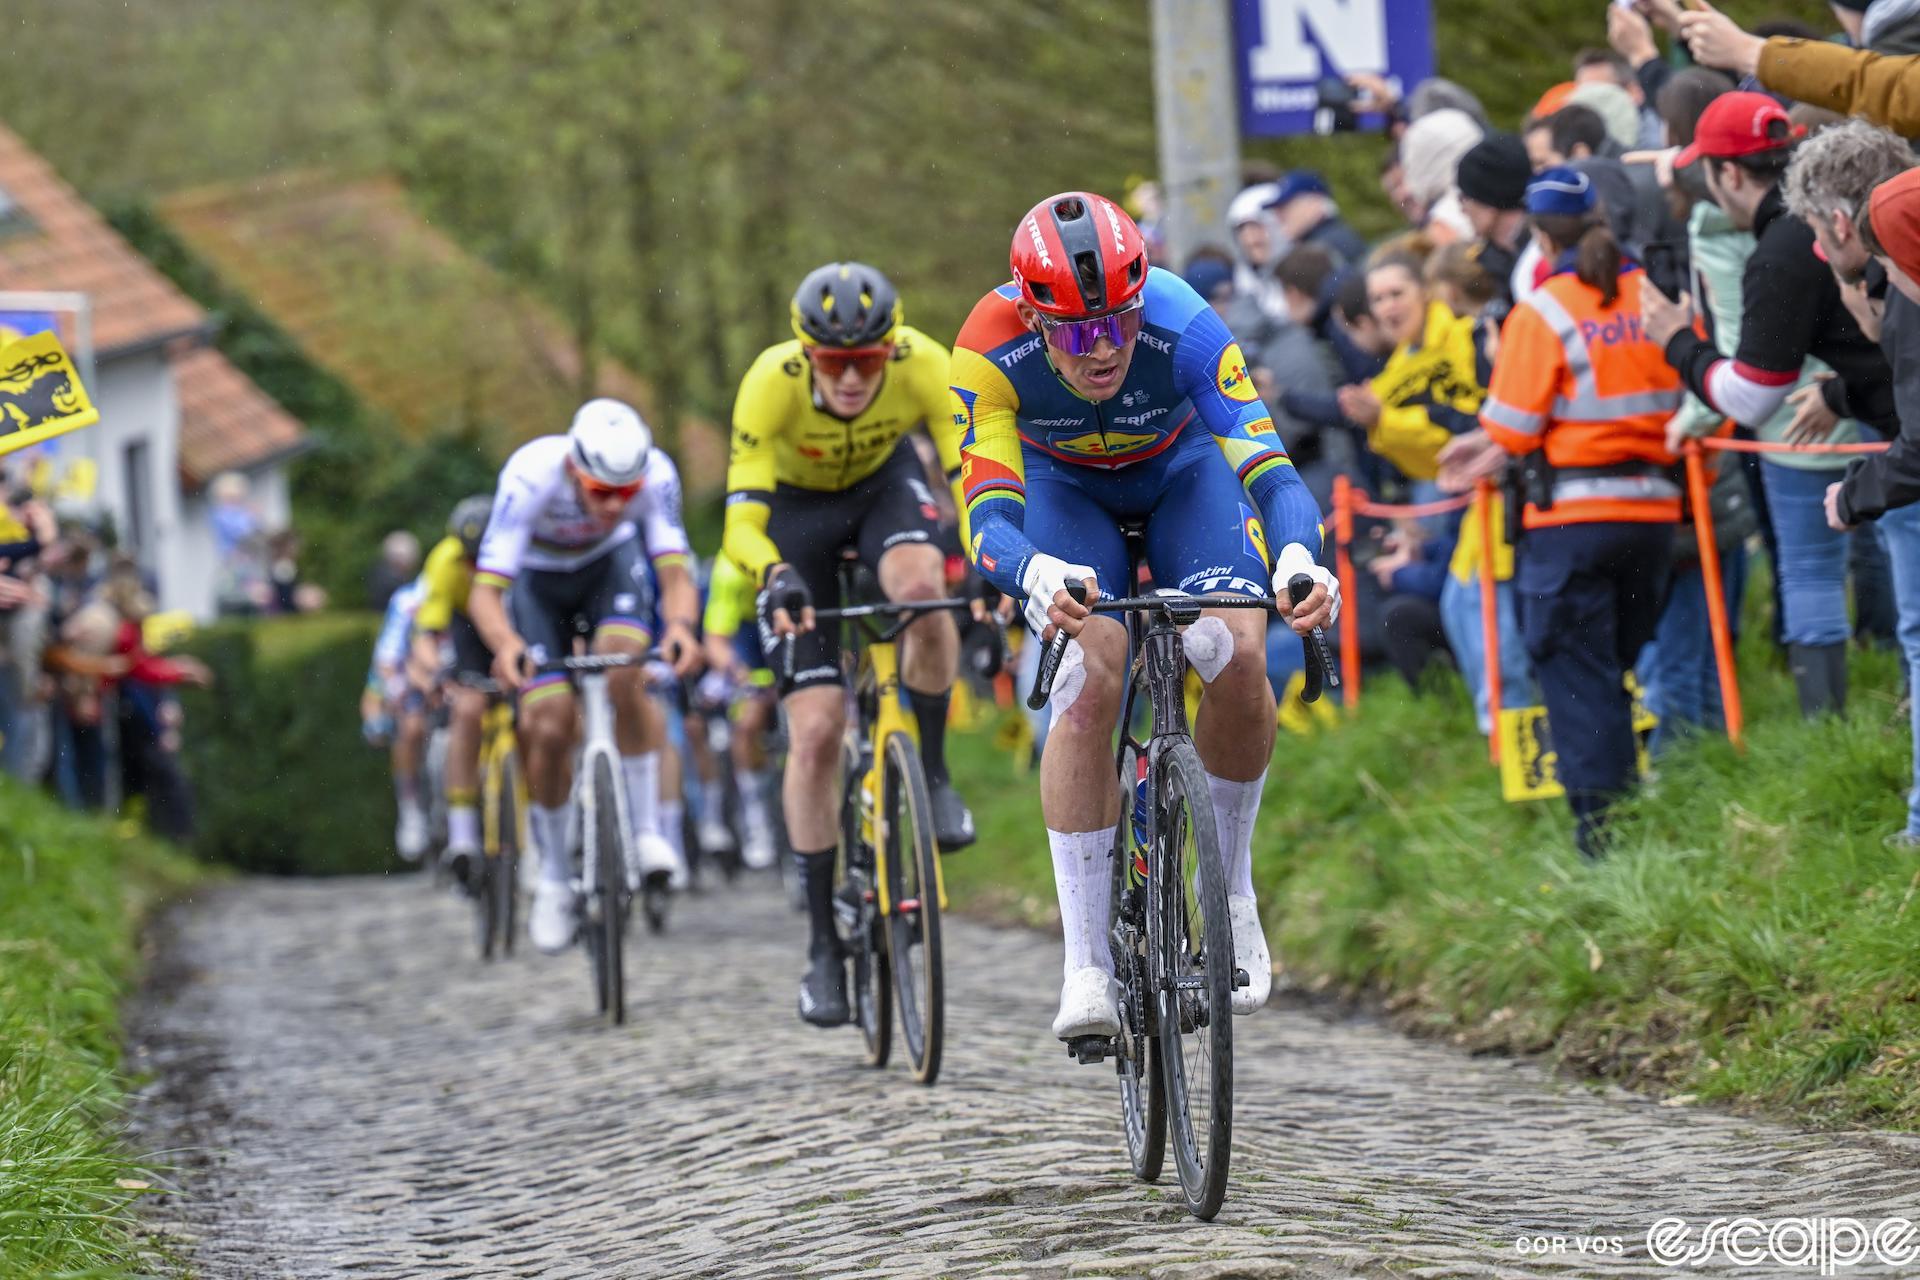 Mads Pedersen lays down an attack on the cobbles at the Tour of Flanders as Matteo Jorgenson attempts to bridge. Mathieu van der Poel is just behind.